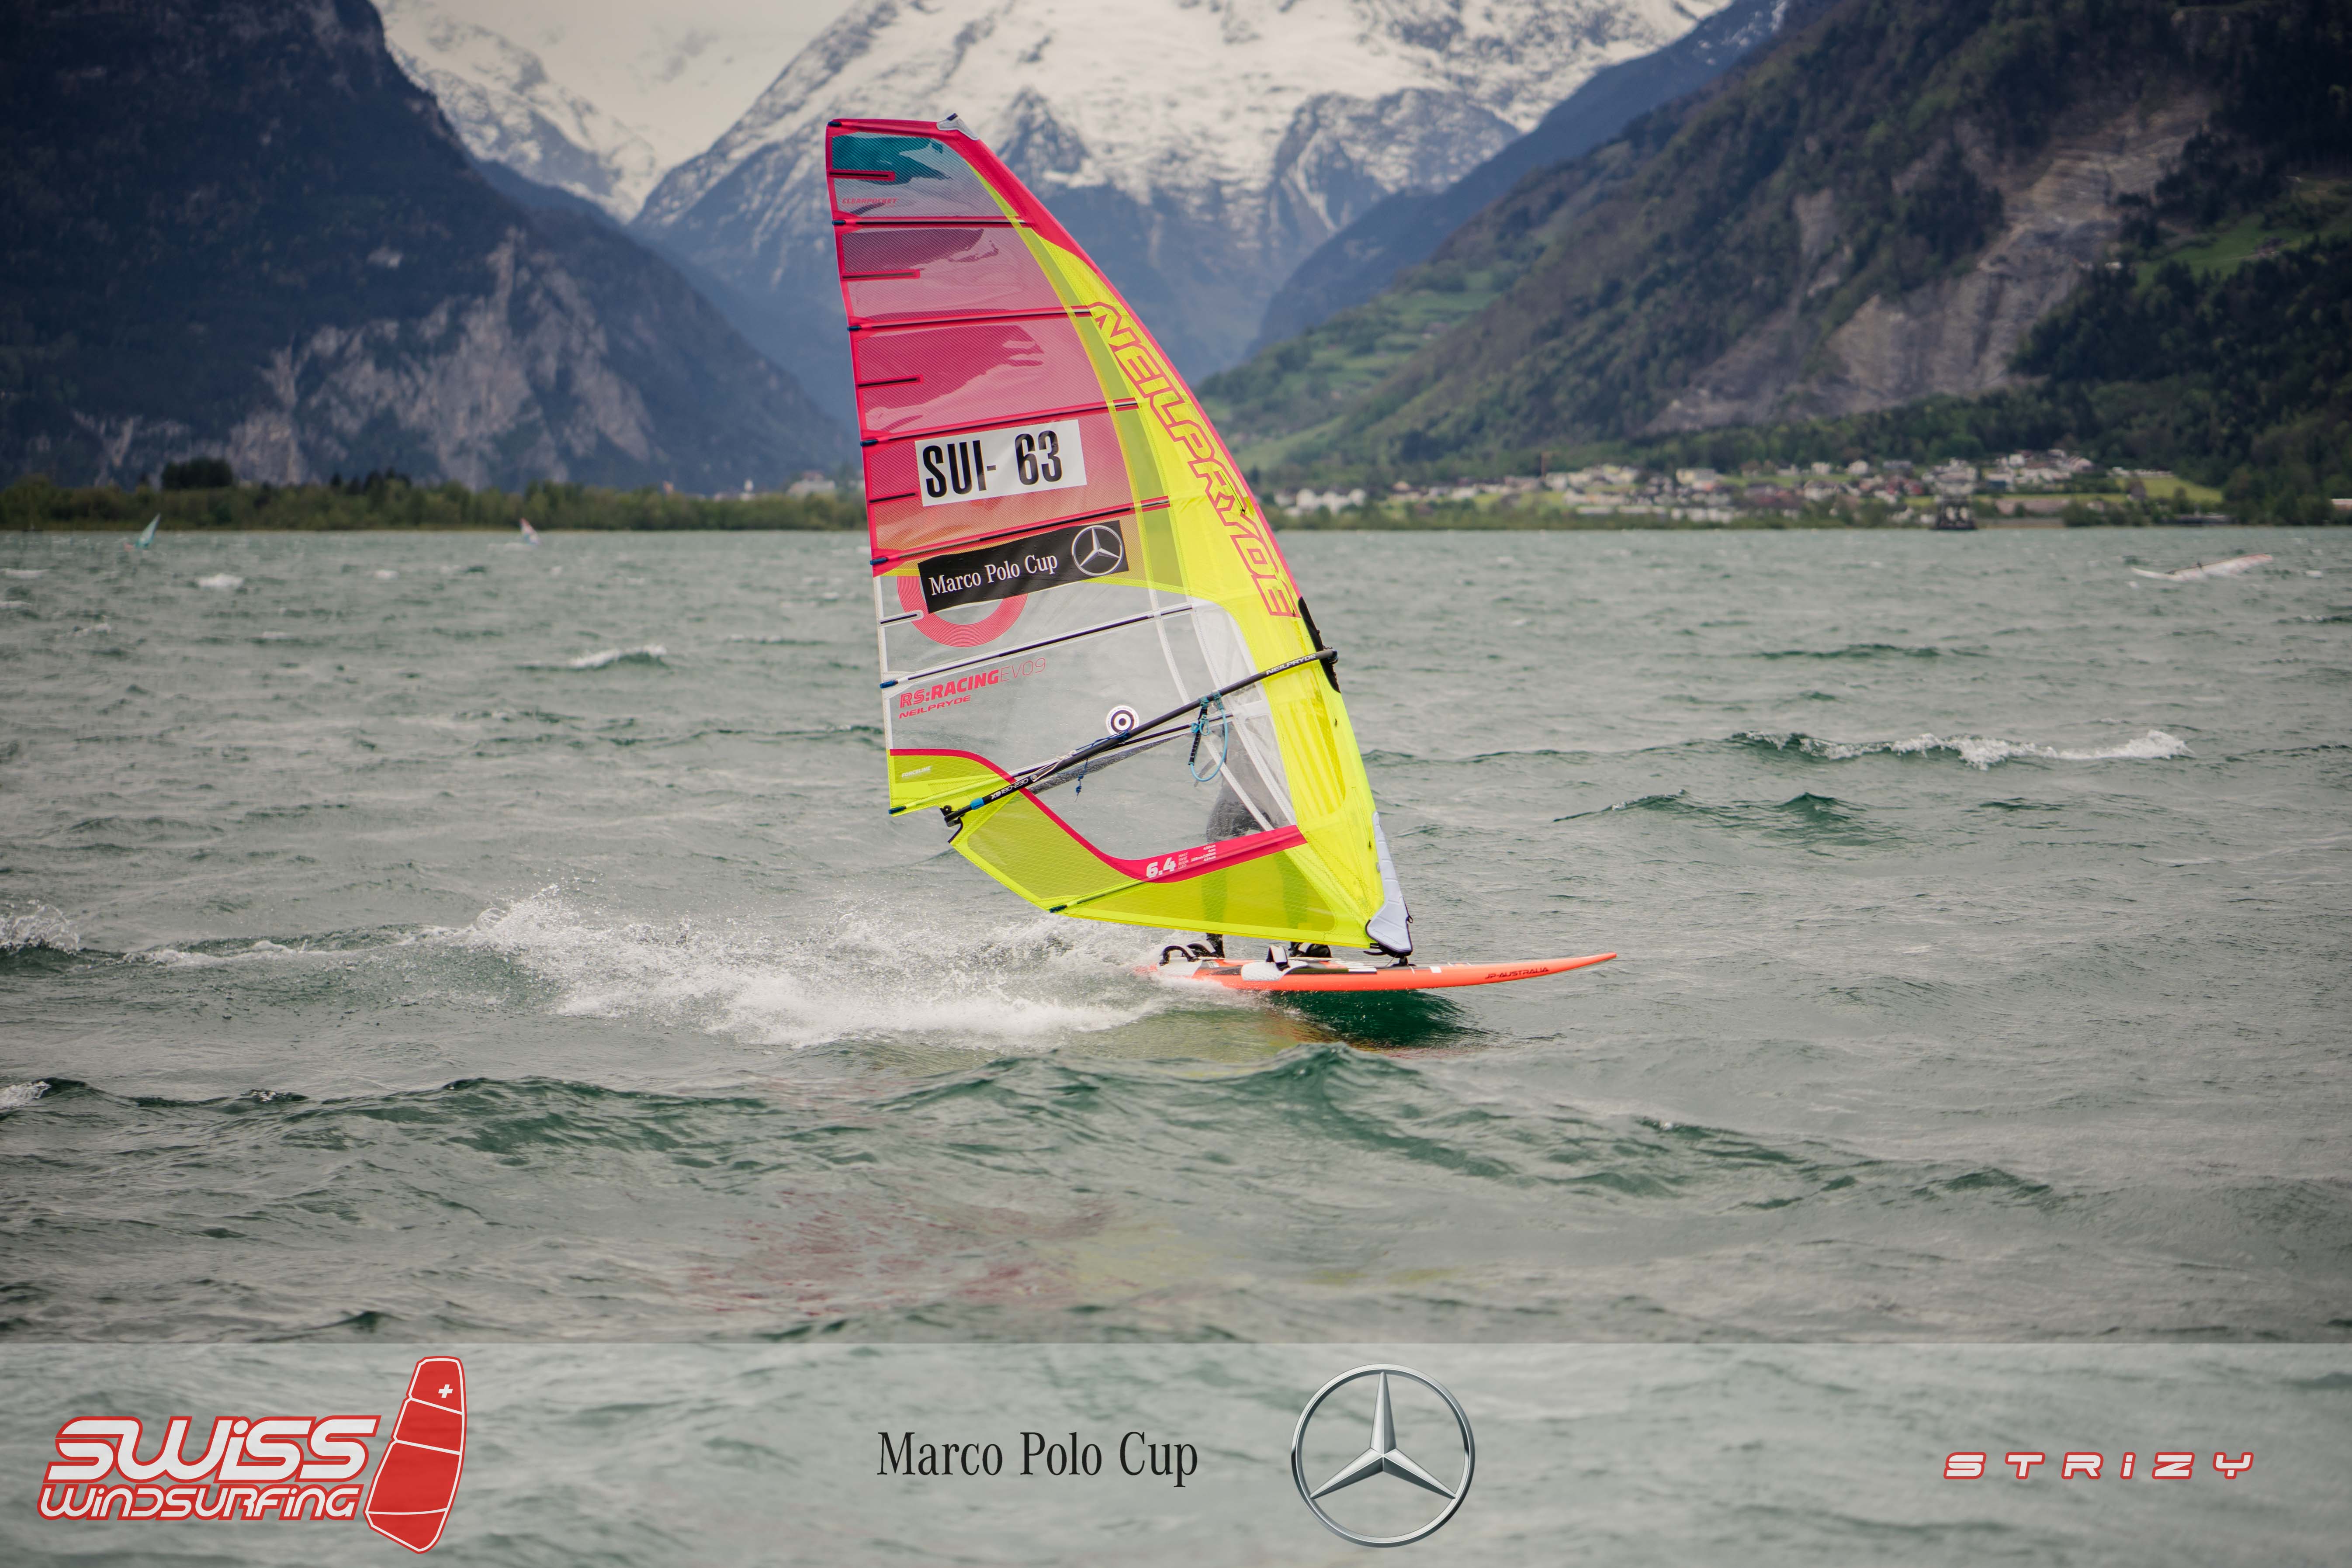  Windsurfing  MarcoPoloCup 2017  Urnersee  Day 1